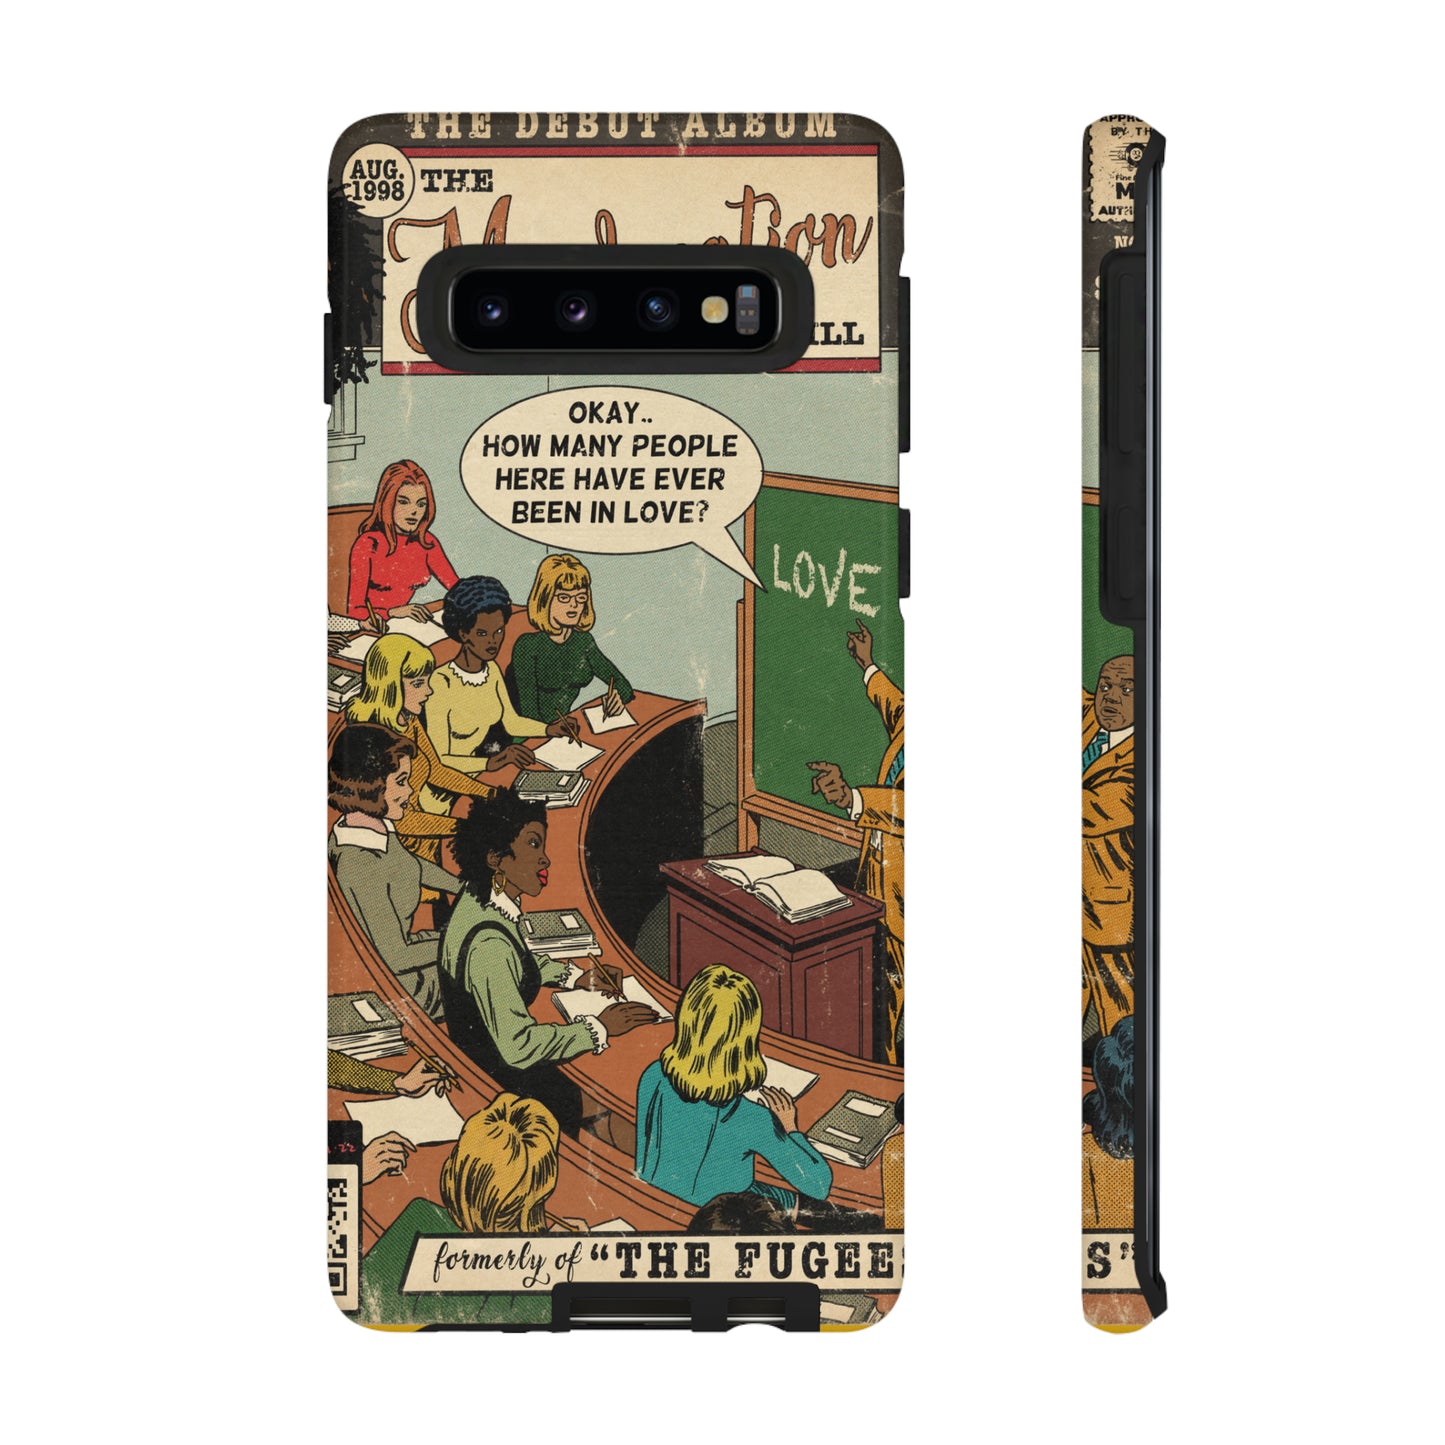 Lauryn Hill - The Miseducation of Lauryn Hill - Tough Phone Cases